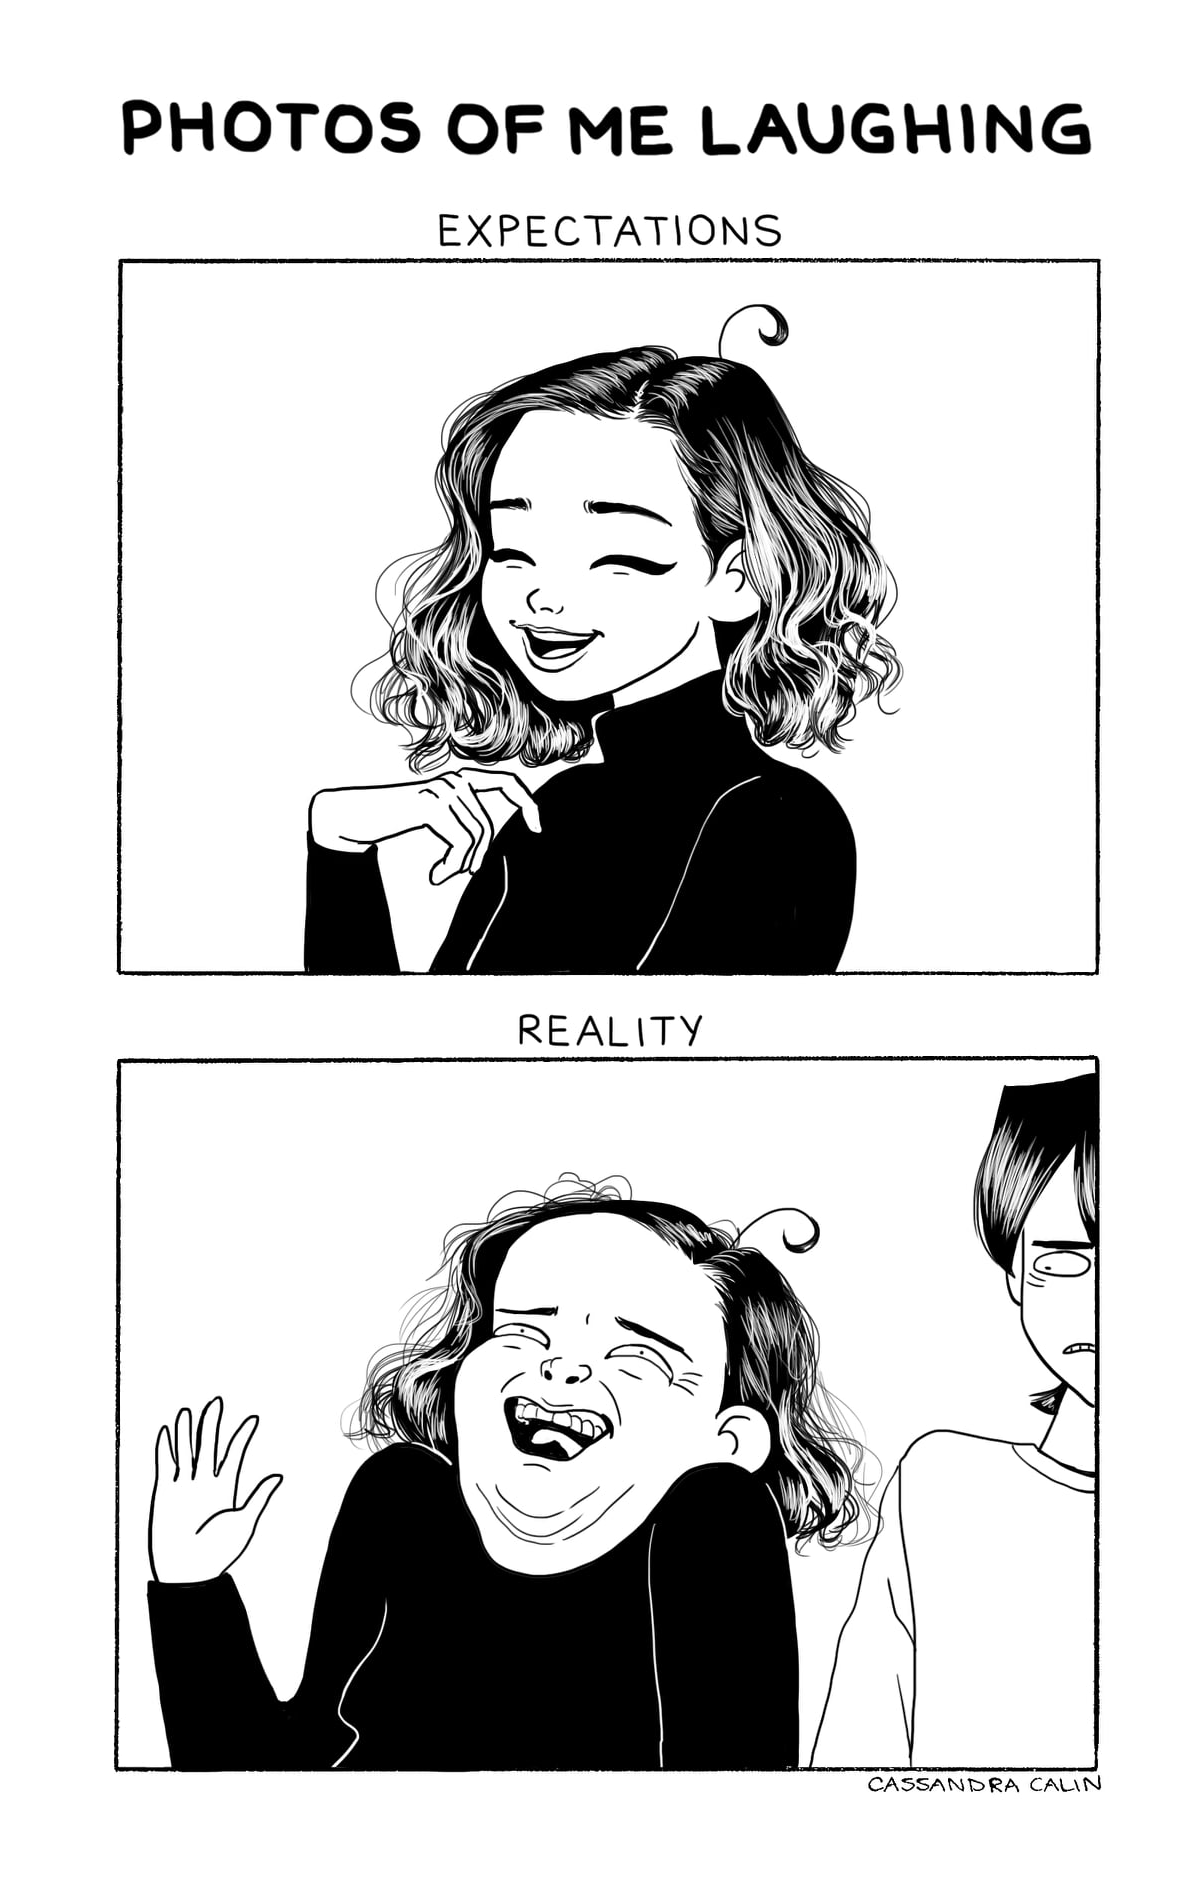 High Quality Laugh expectations Blank Meme Template